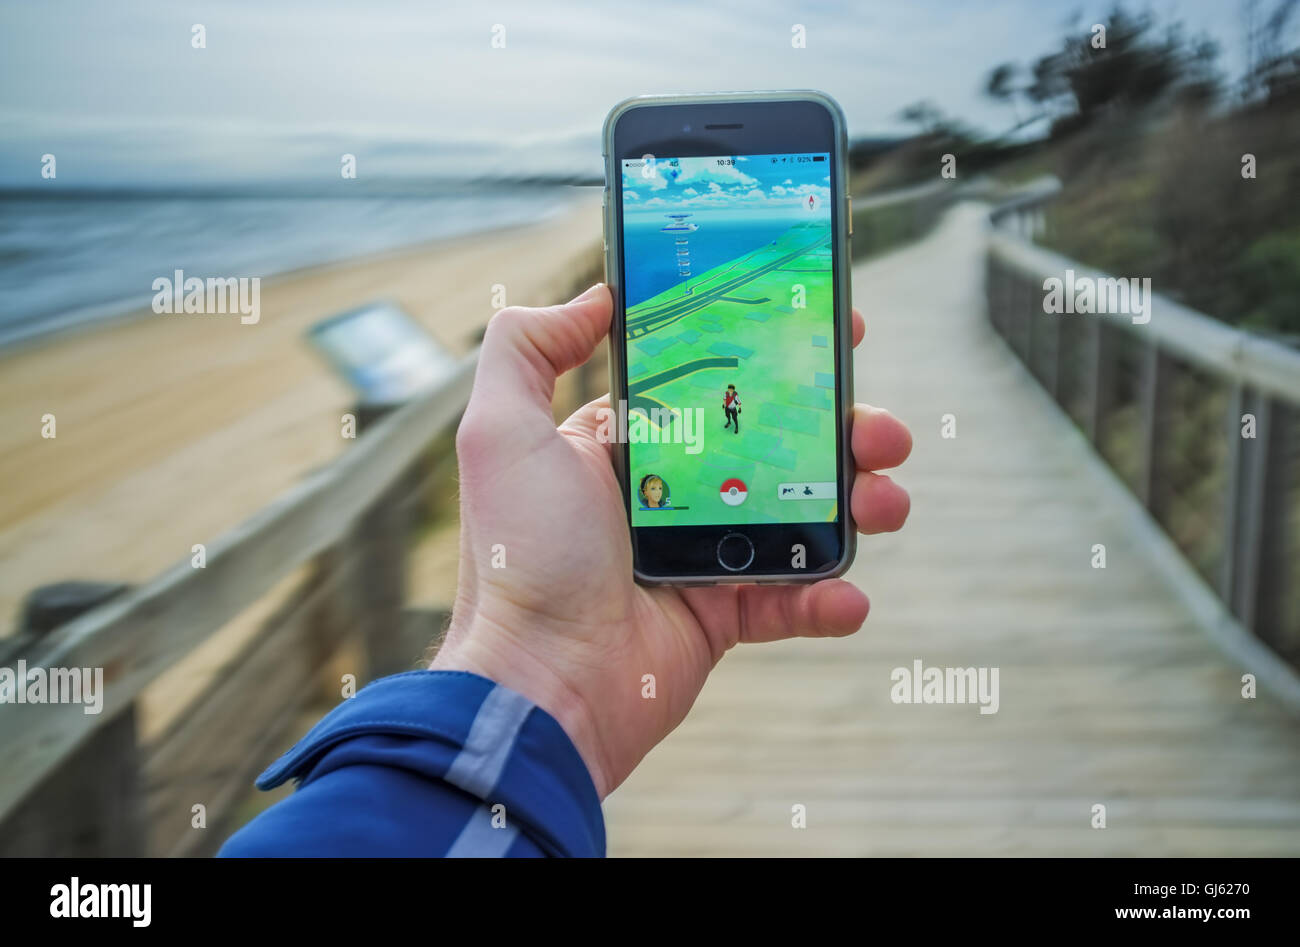 Melbourne, Australia - August 12, 2016: Male hand holding iPhone 6 with Pokemon Go game on boardwalk near ocean shore. Stock Photo